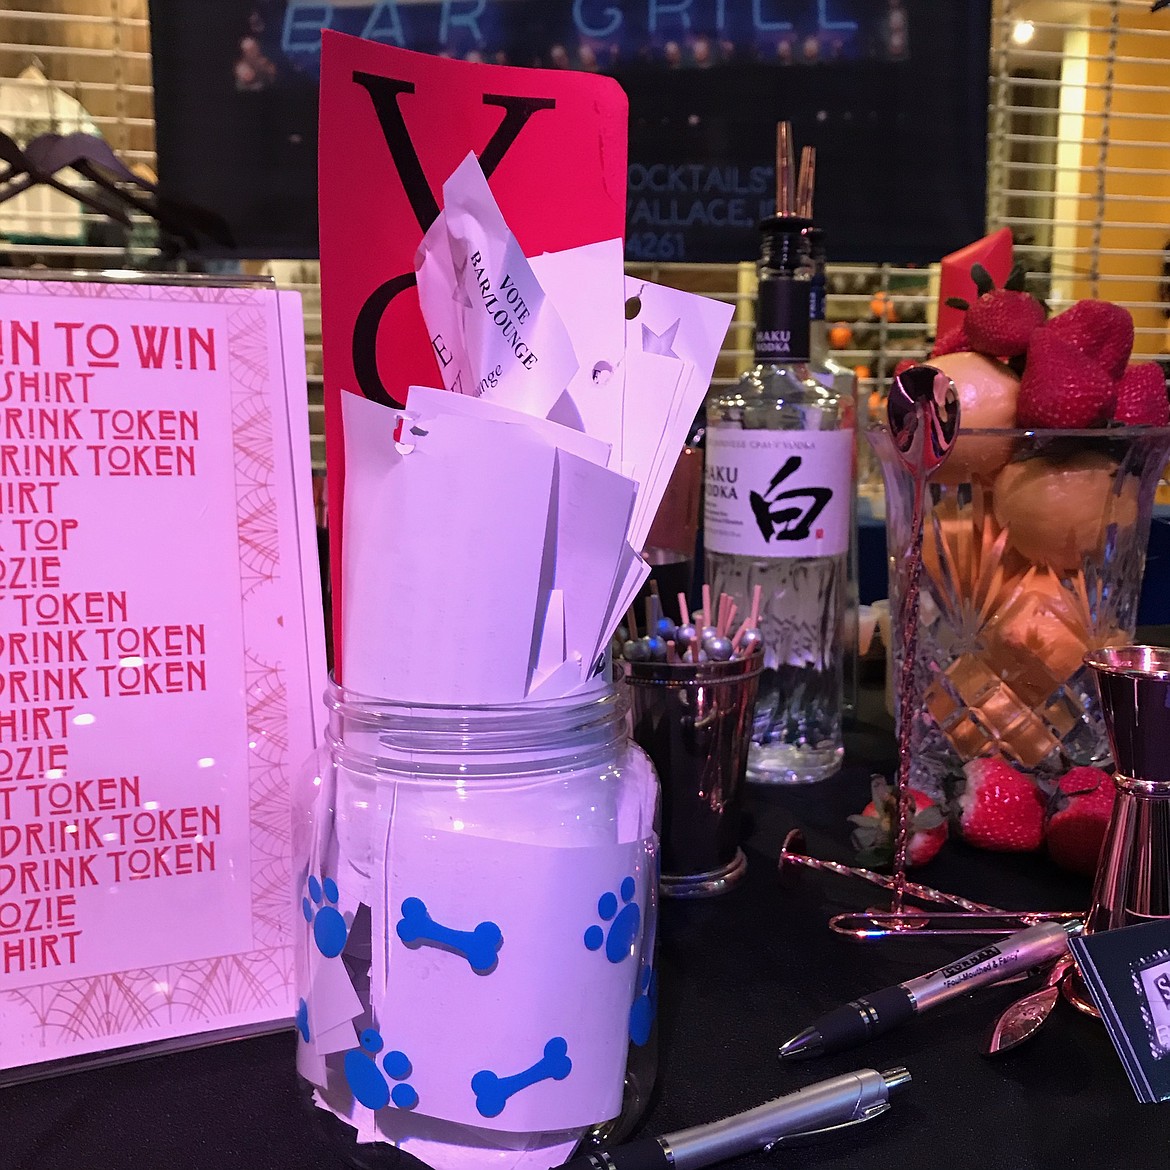 The overflowing People’s Choice jar at the the Silver Corner Bar’s booth.